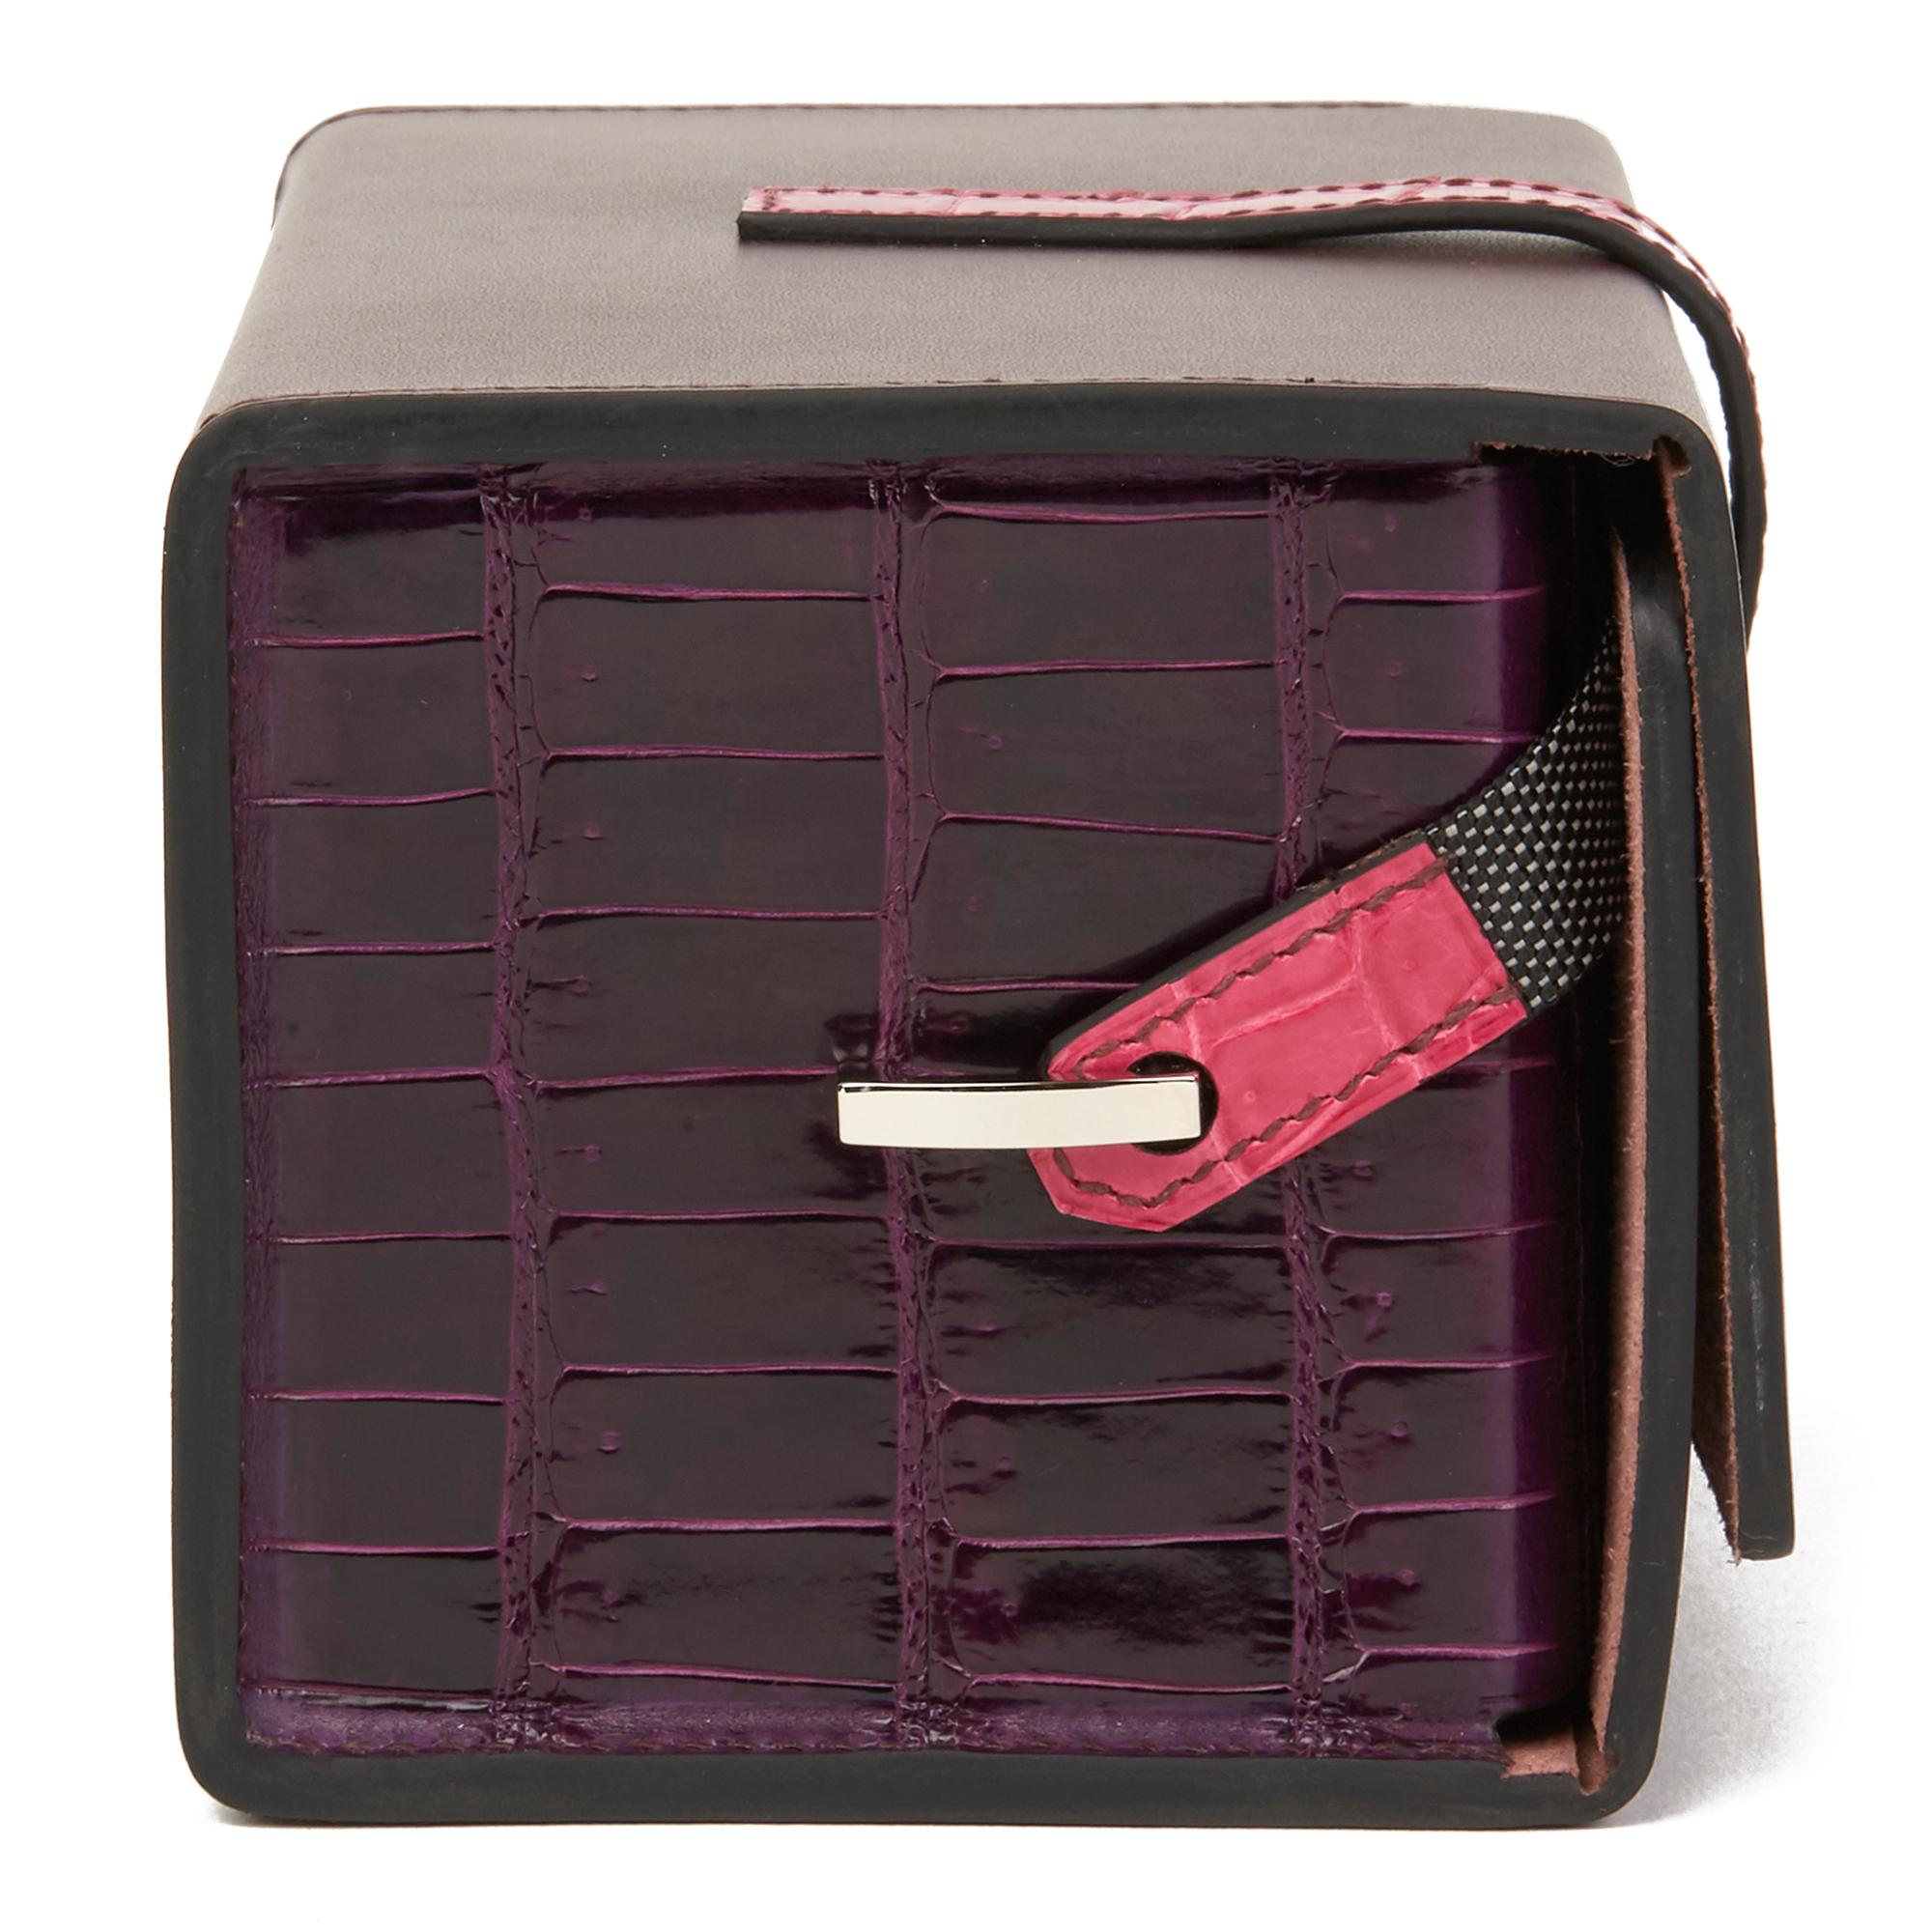 HERMÈS
Amethyst Vache Hunter Cowhide & Shiny Porosus Crocodile Leather Petit H Minaudiere 18

Reference: HB2687
Age (Circa): 2019
Accompanied By: Hermès Dust Bag, Box, Invoice, CITES, Care Booklet
Authenticity Details: (Made in France)
Gender: